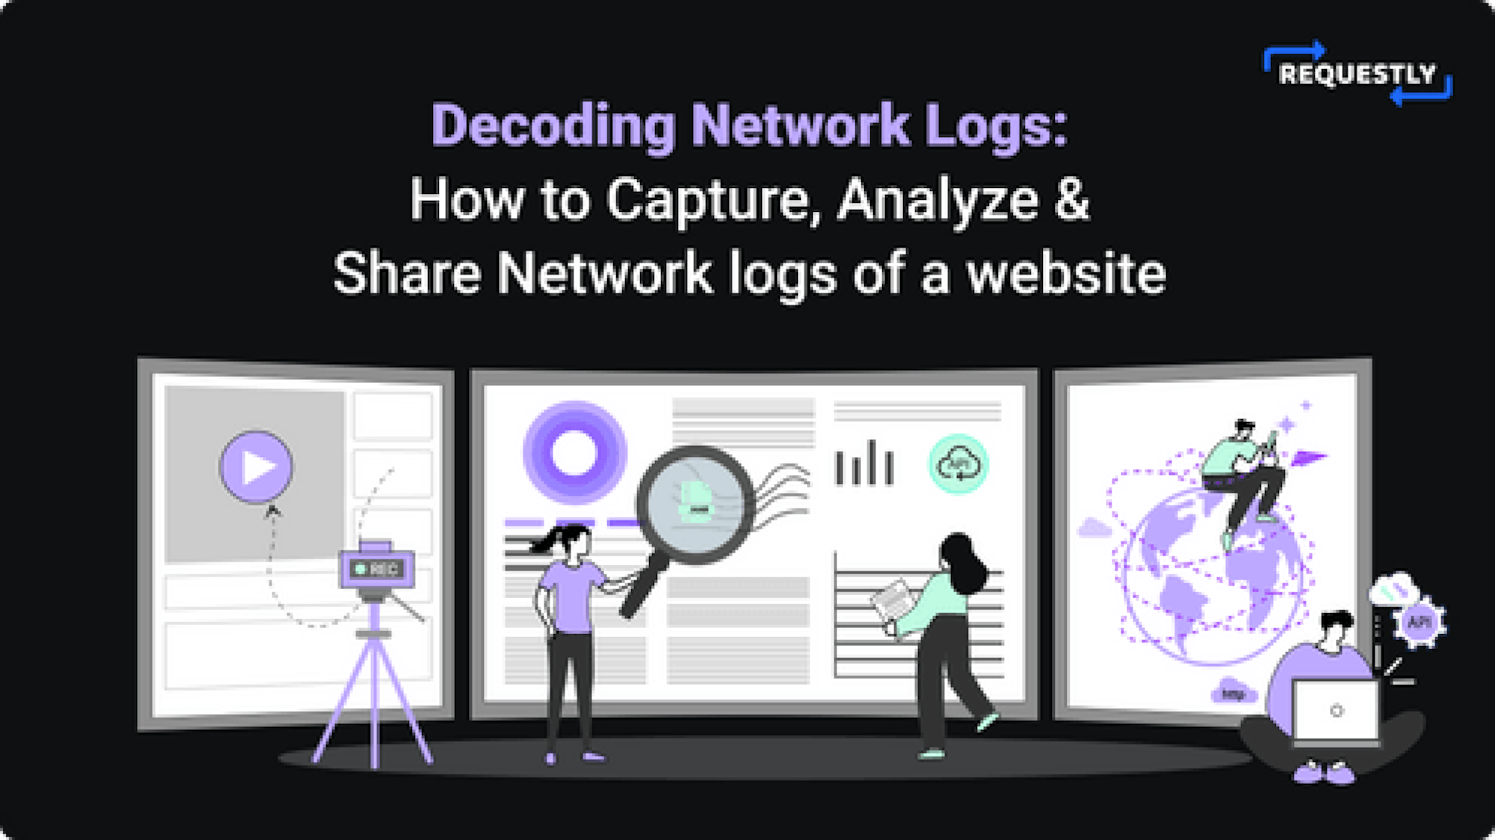 Decoding Network Logs: How to Capture, Analyze & Share Network logs of a website